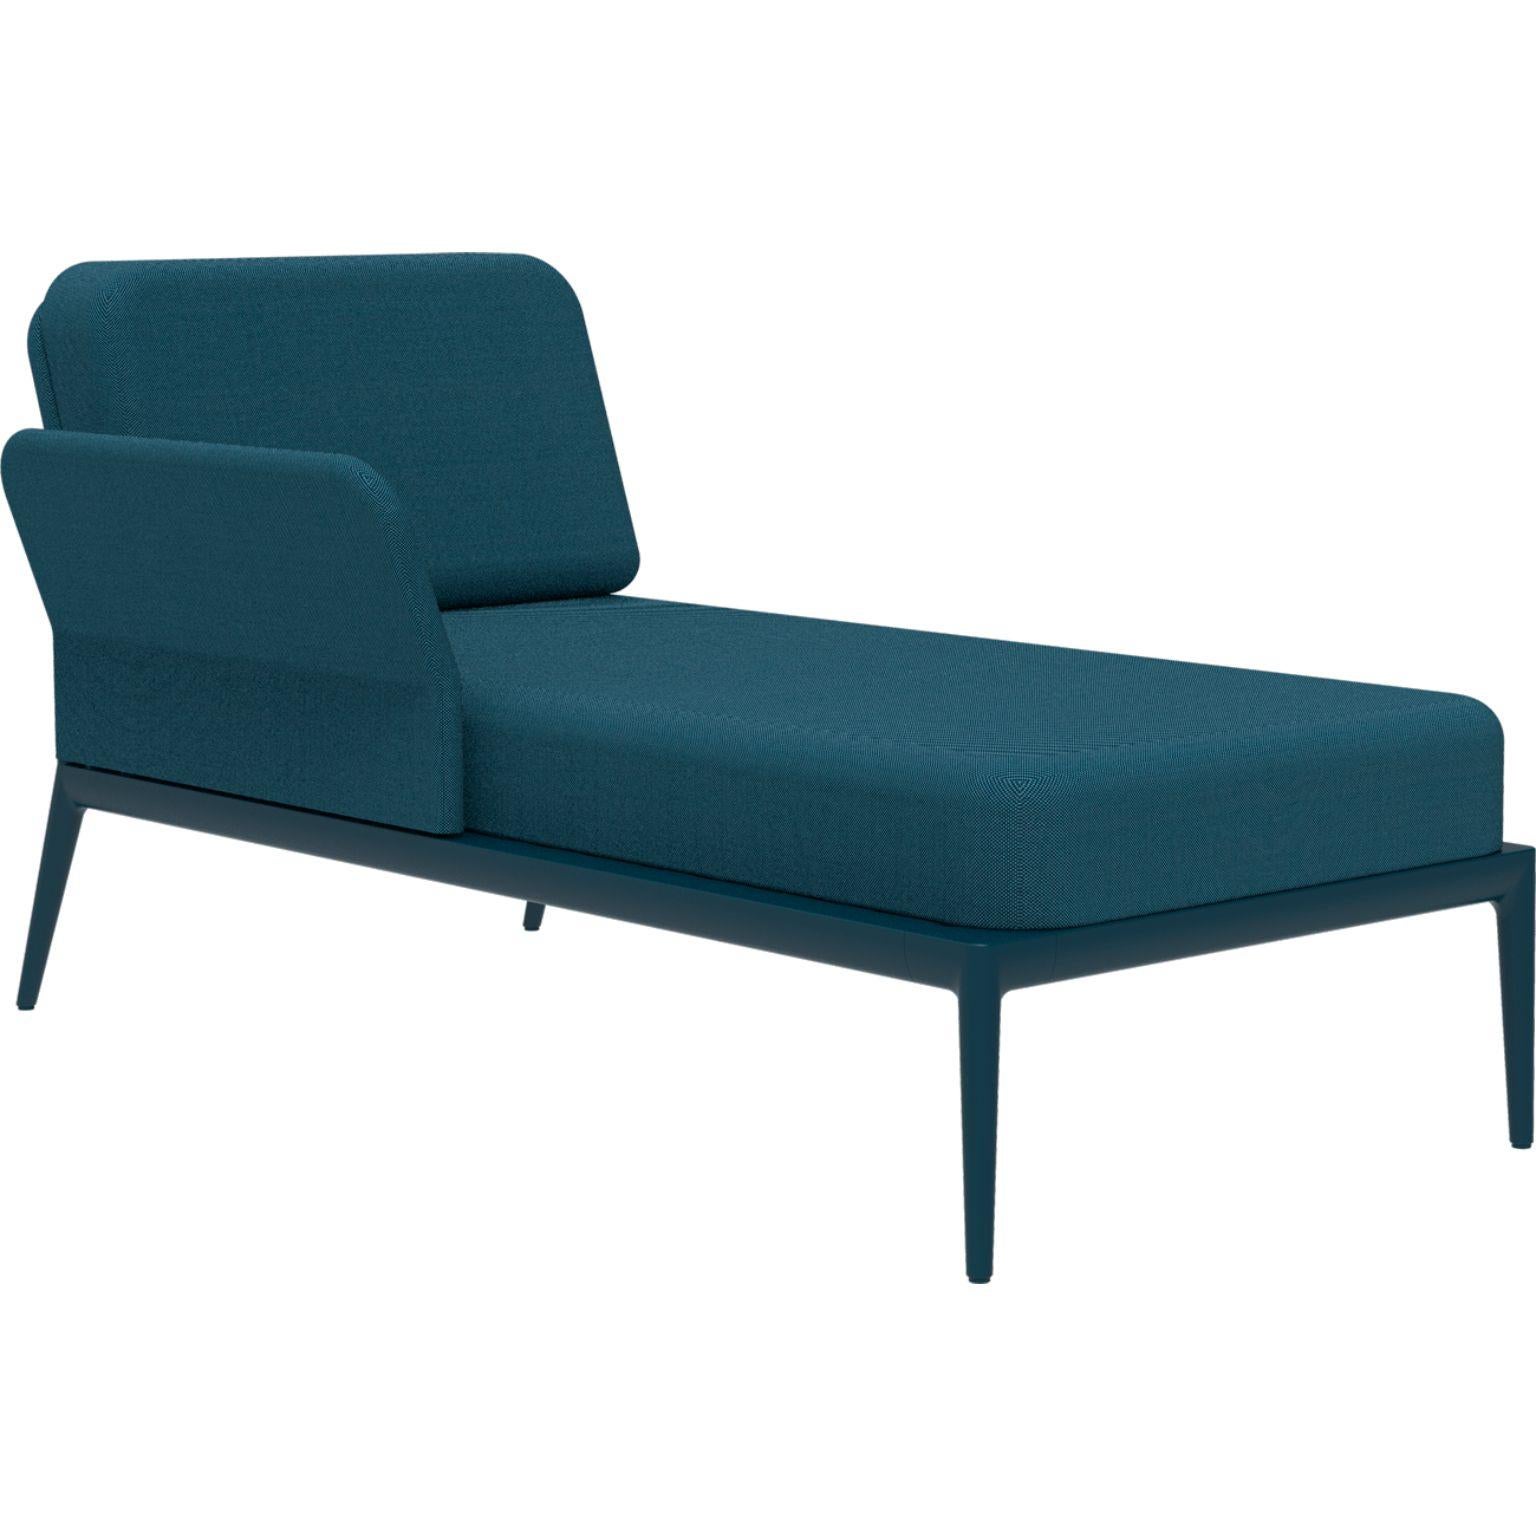 Cover Navy Right Chaise Longue by MOWEE
Dimensions: D 80 x W 155 x H 81 cm (seat height 42 cm).
Material: Aluminum and upholstery.
Weight: 28 kg.
Also available in different colors and finishes. Please contact us.

An unmistakable collection